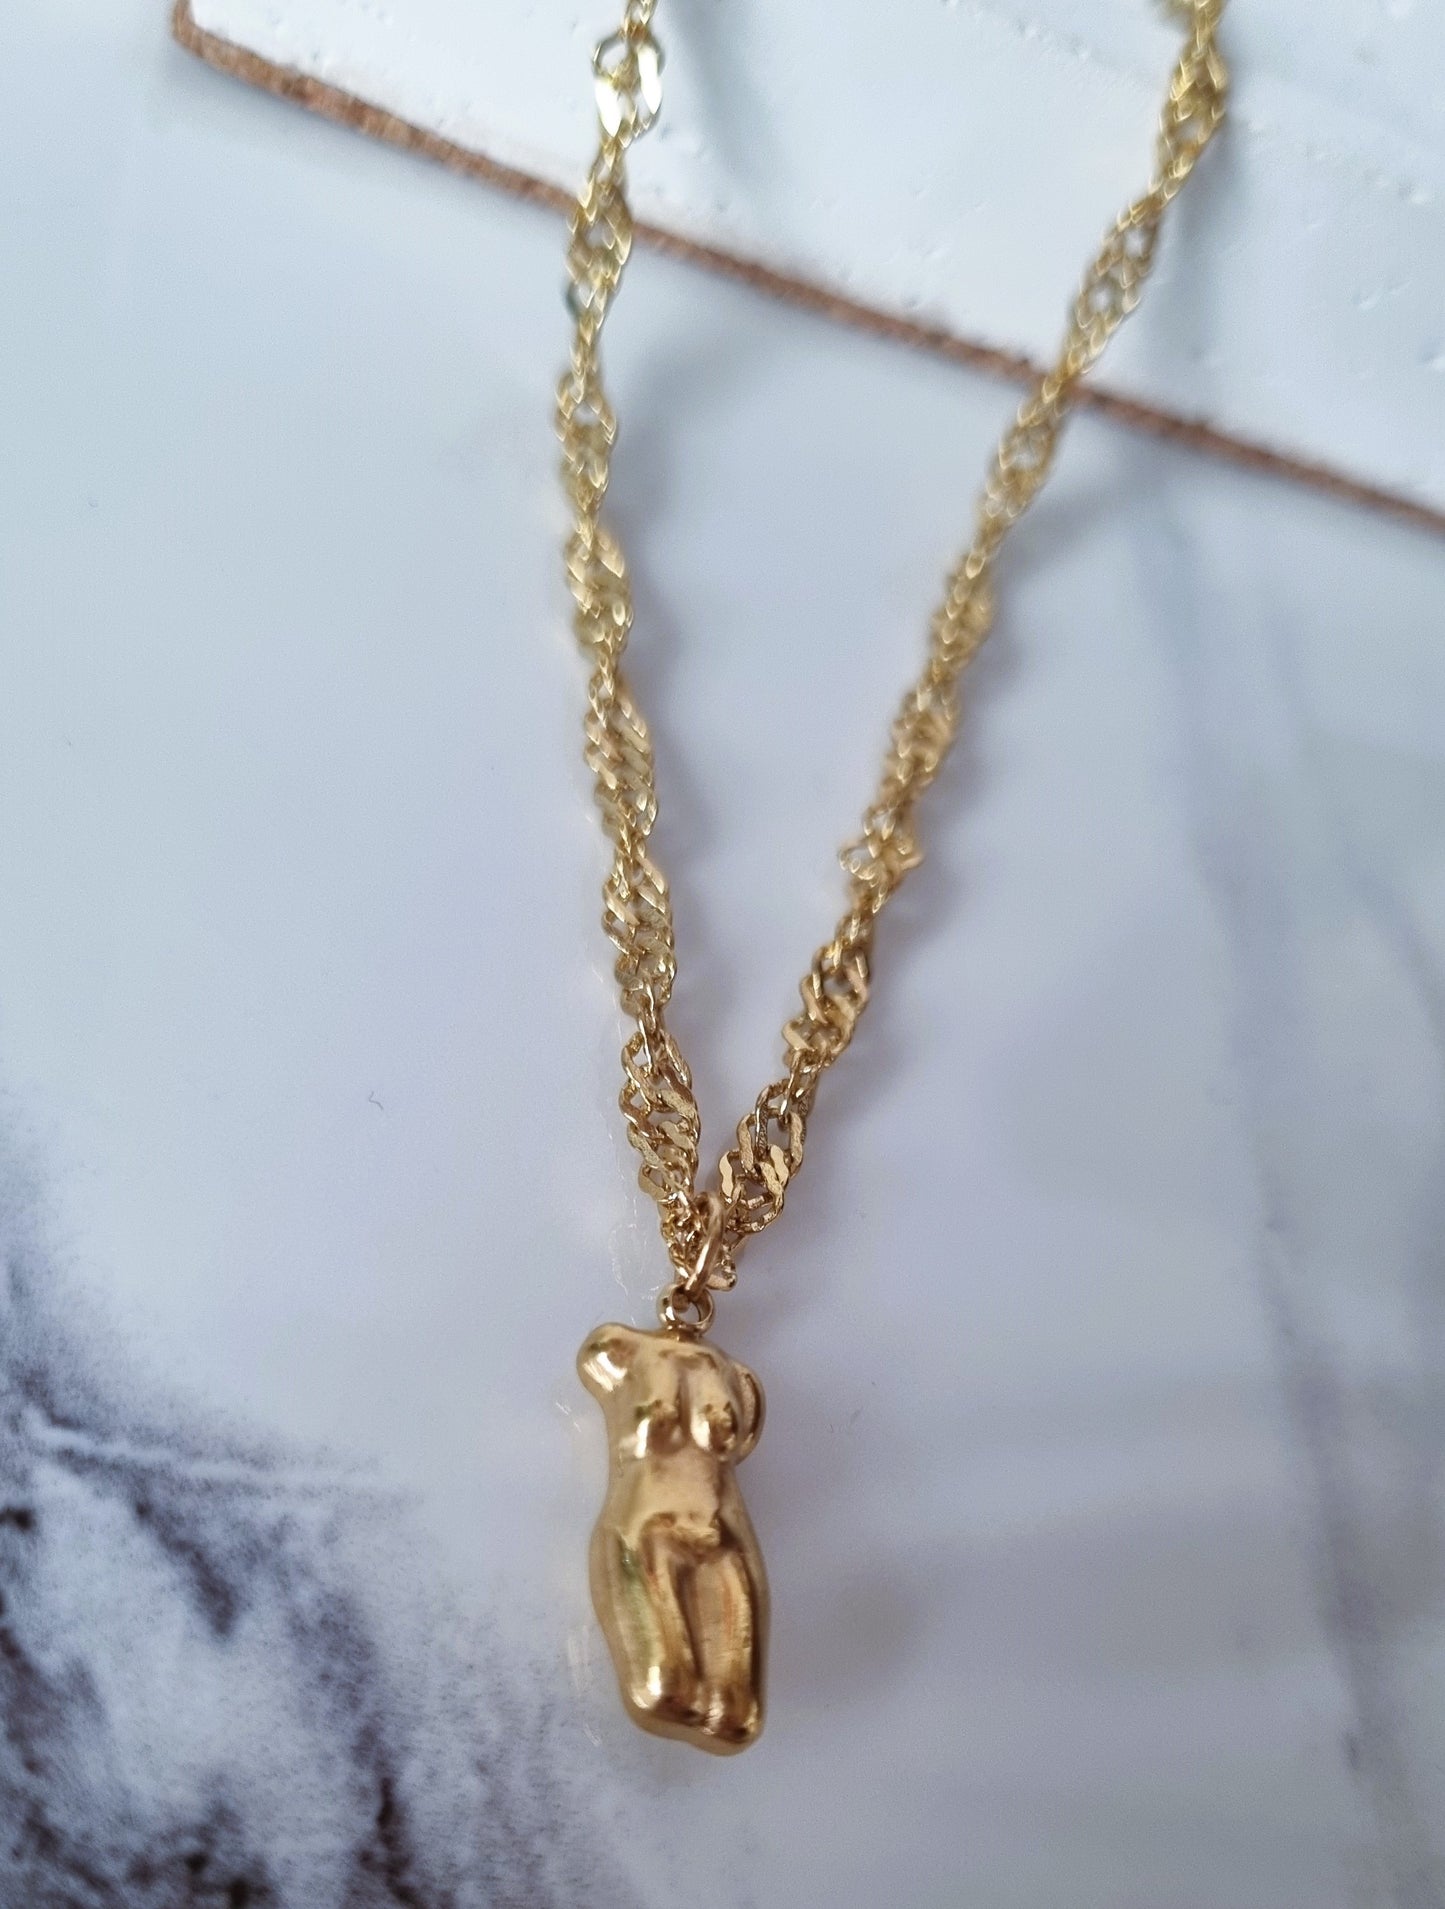 Gold body necklace